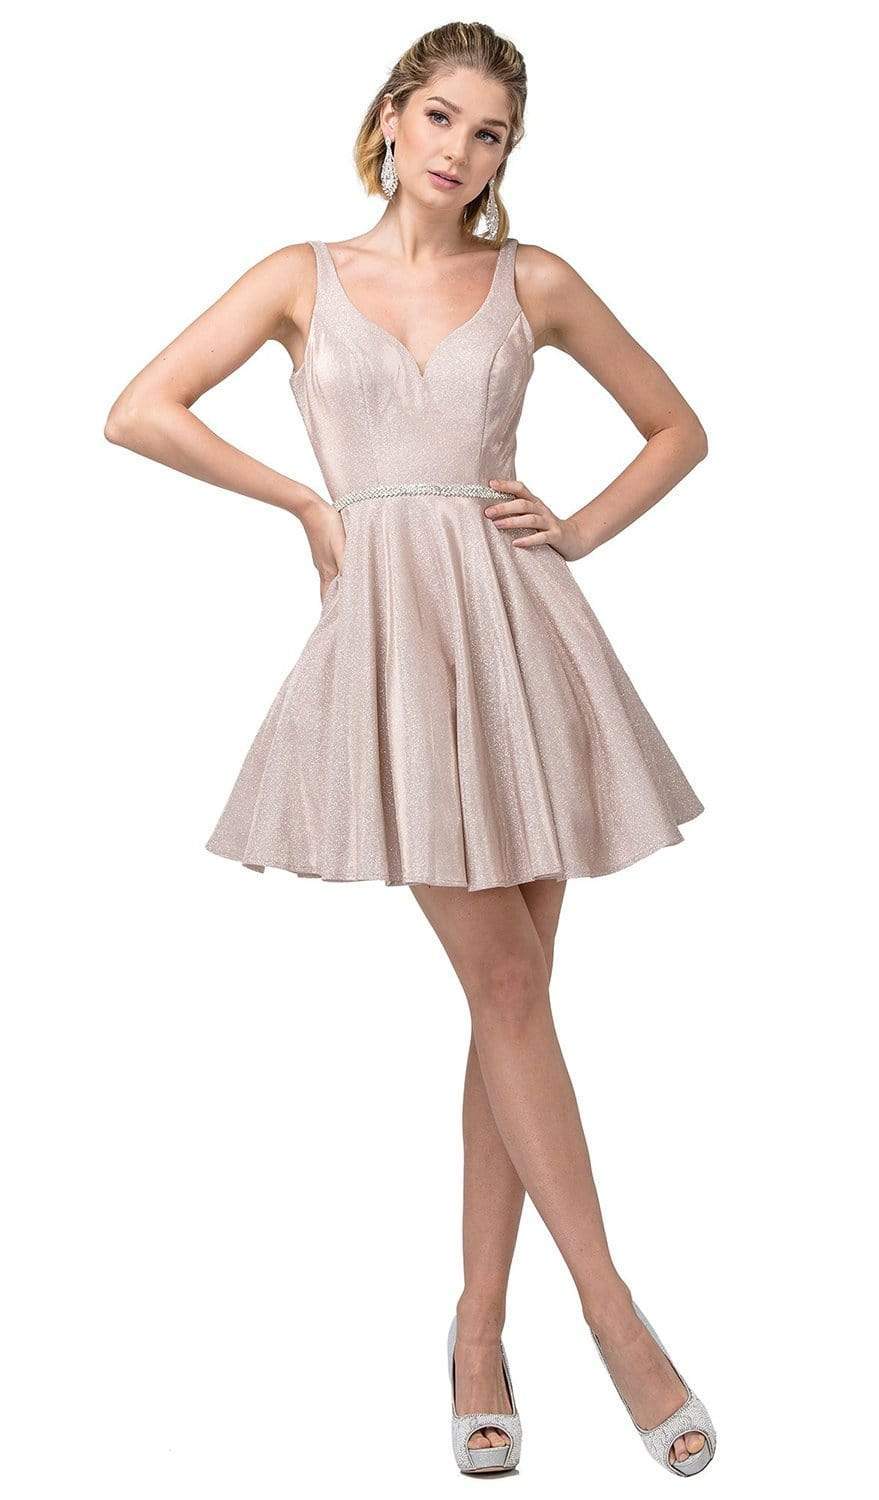 Dancing Queen - 3142 V-Neck Pleated A-Line Cocktail Dress
